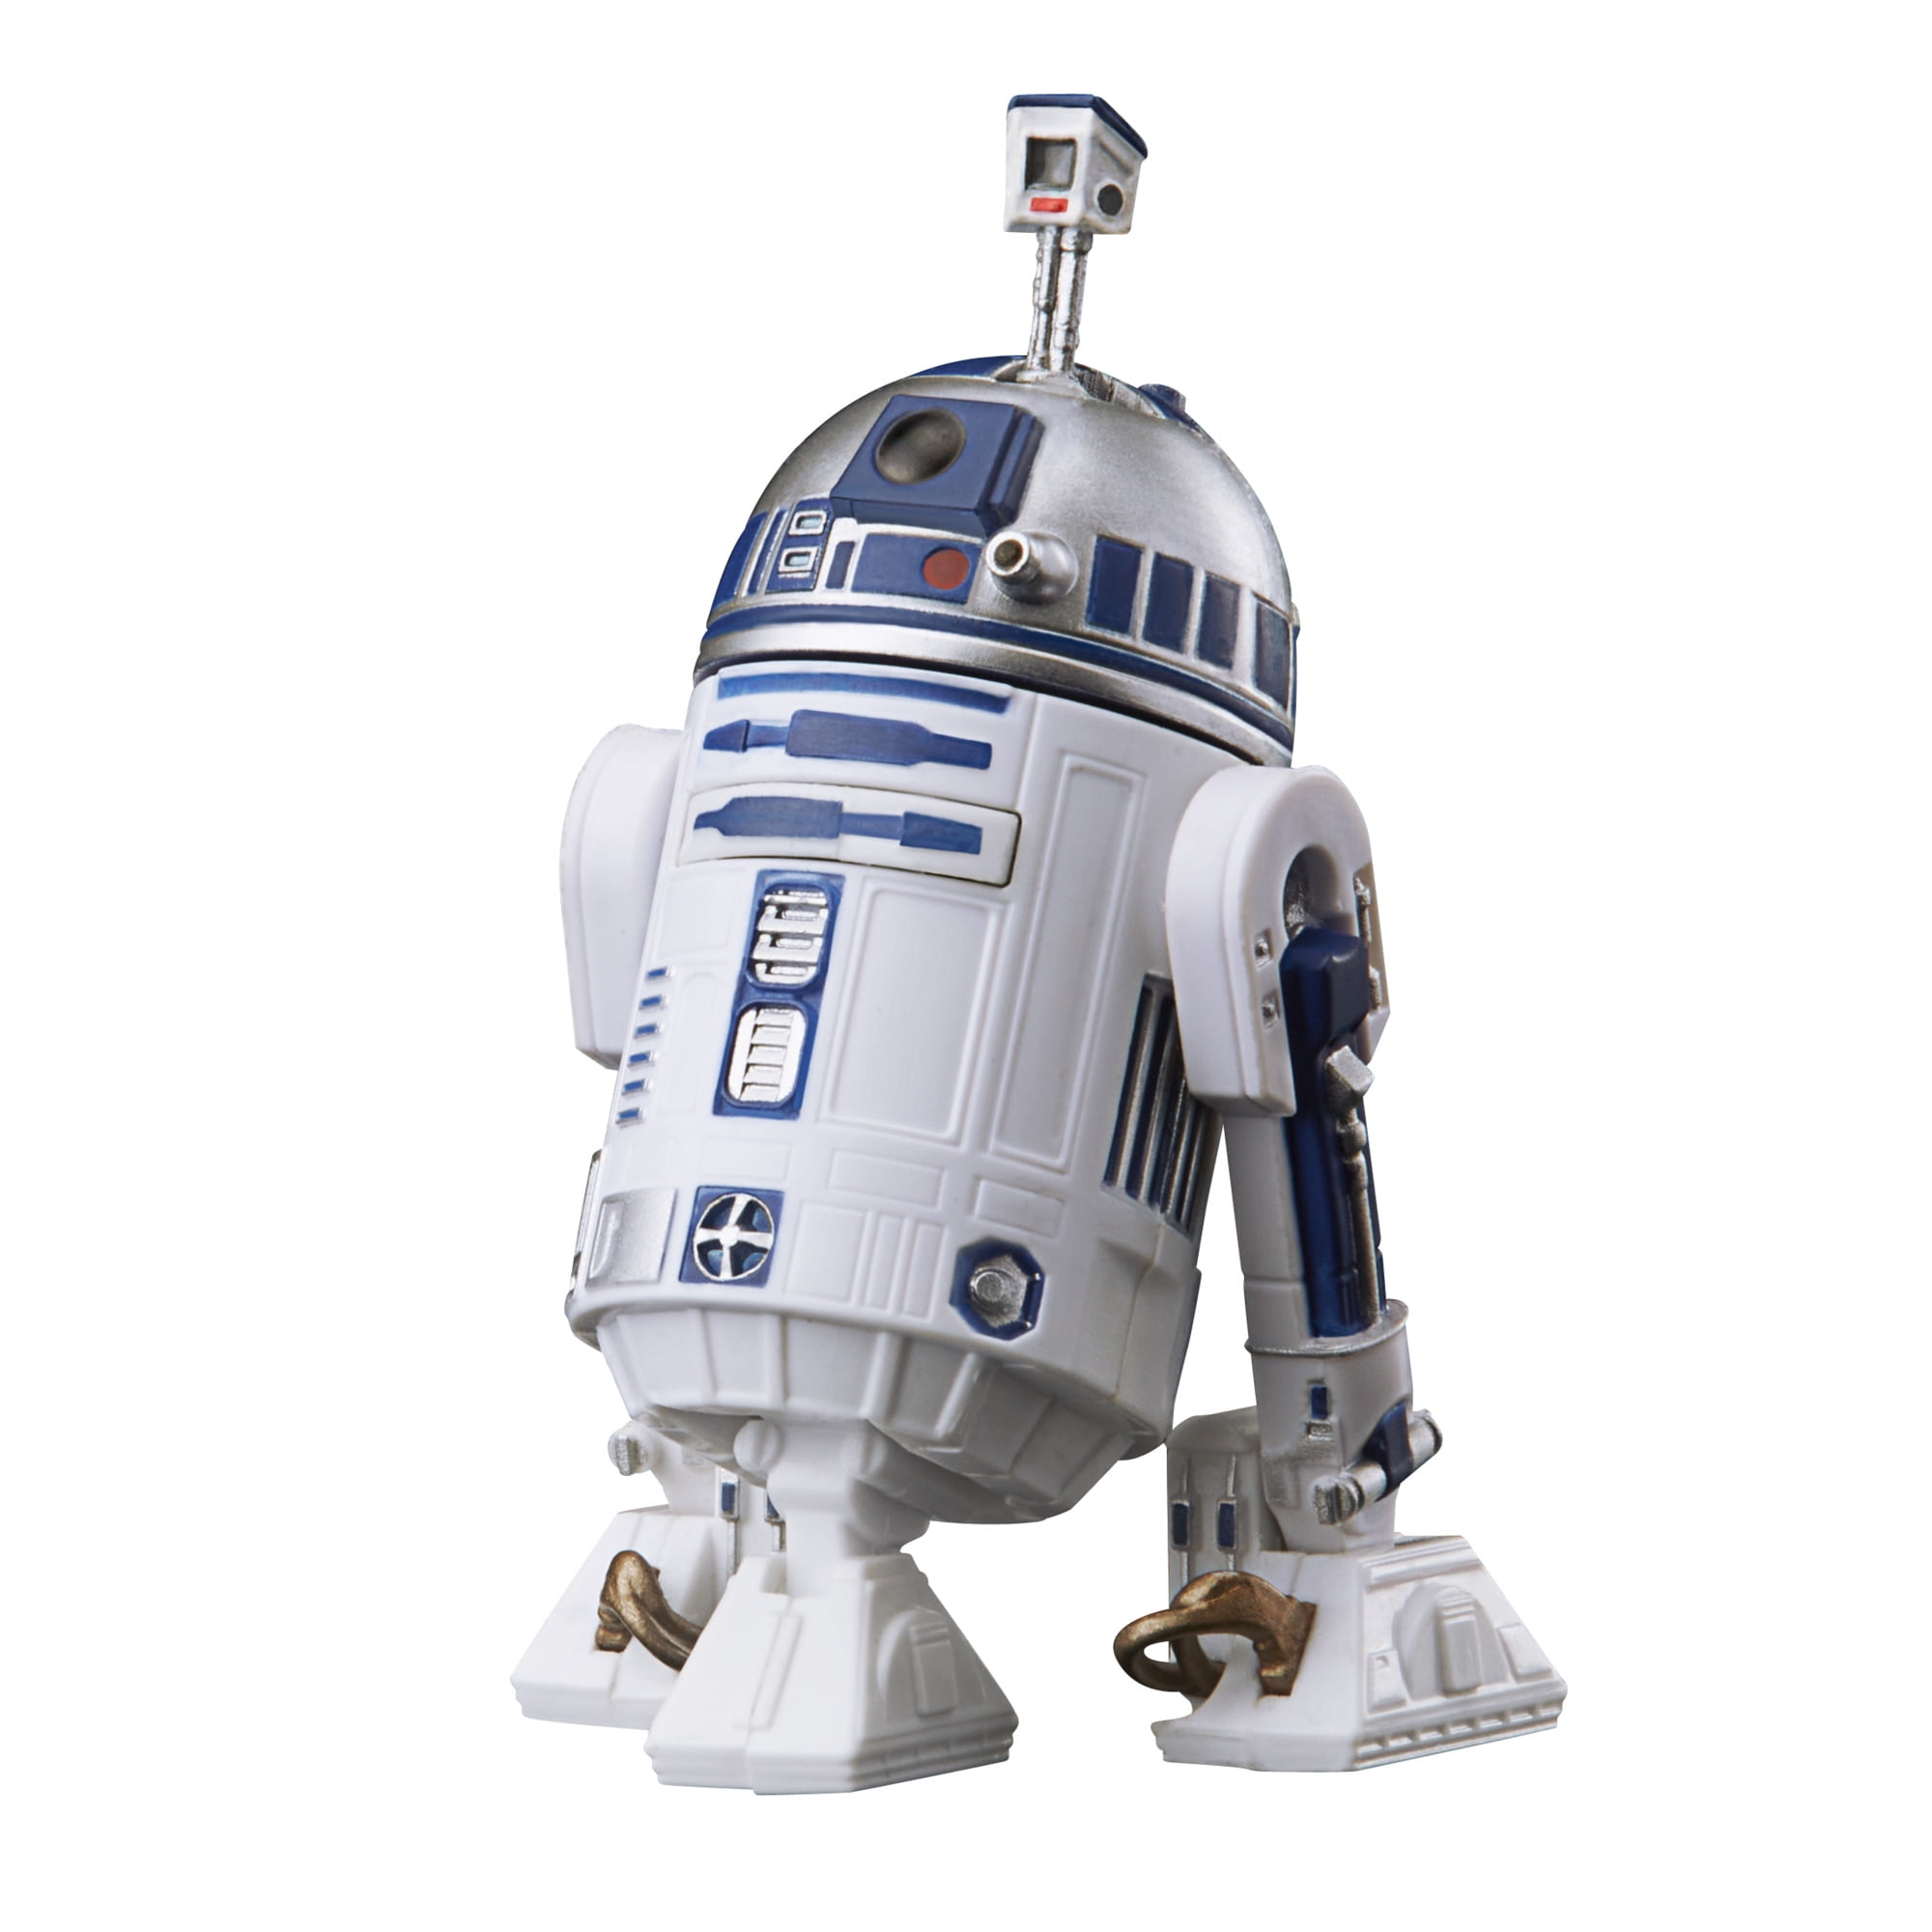 Star Wars Hasbro Disney Walmart R2-d2 Collectible Action Figure Toy for sale online 